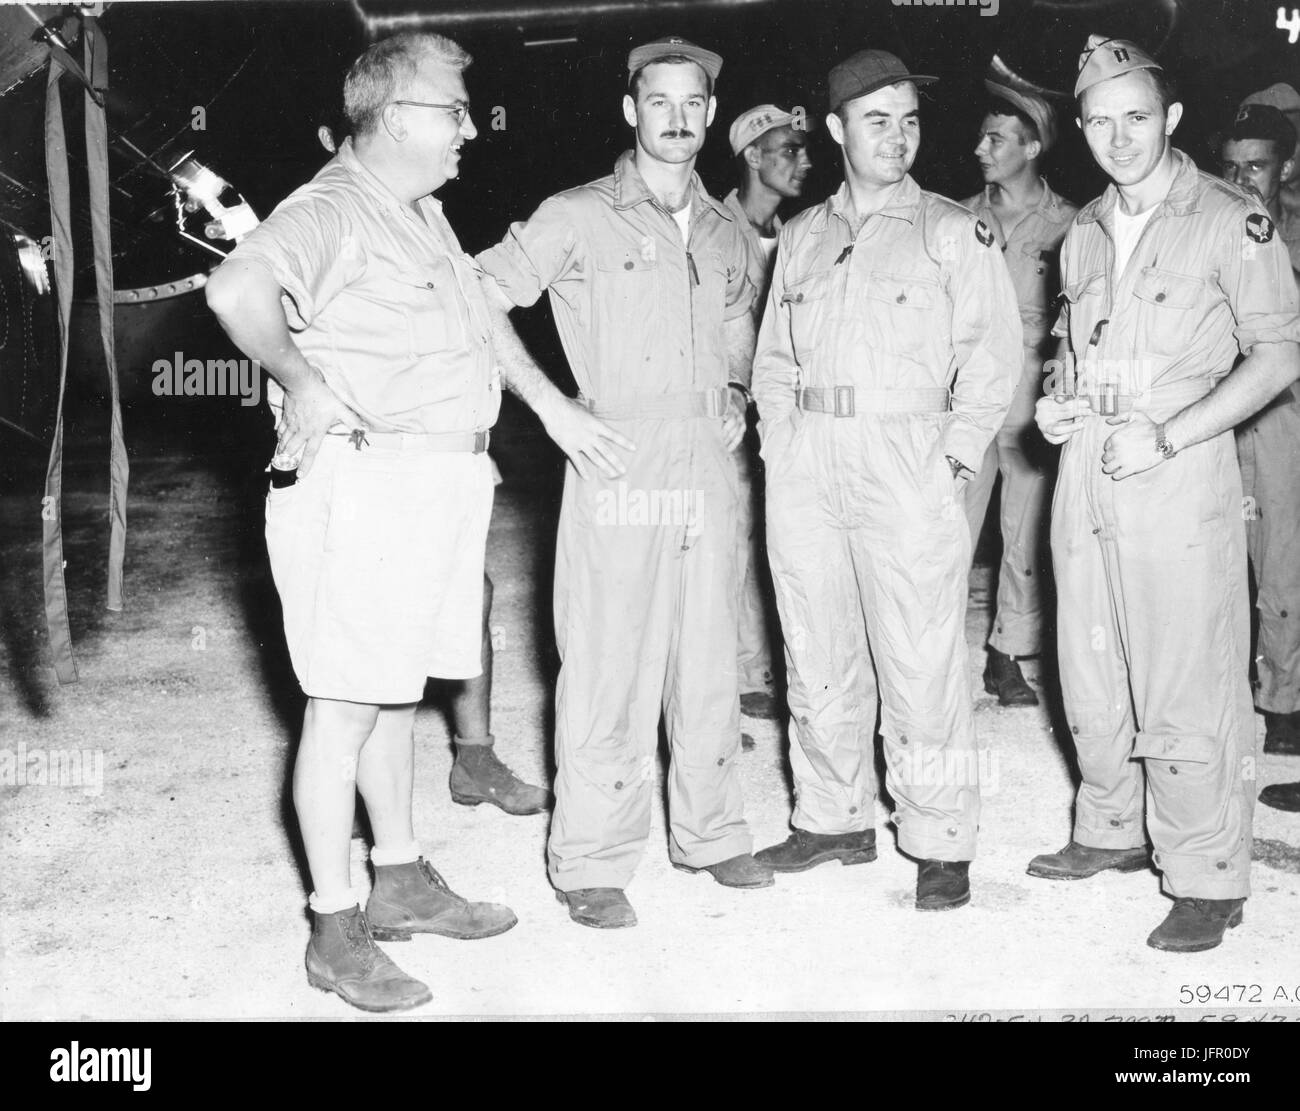 Col Hazen J. Payette, Group Intelligence Officer, briefing (l-r) Major Thomas Ferebee, Col Paul W. Tibbets and Capt Theodore J. Van Kirk before the Hiroshima atomic bomb mission, Tinian, August 6, 1945 Stock Photo